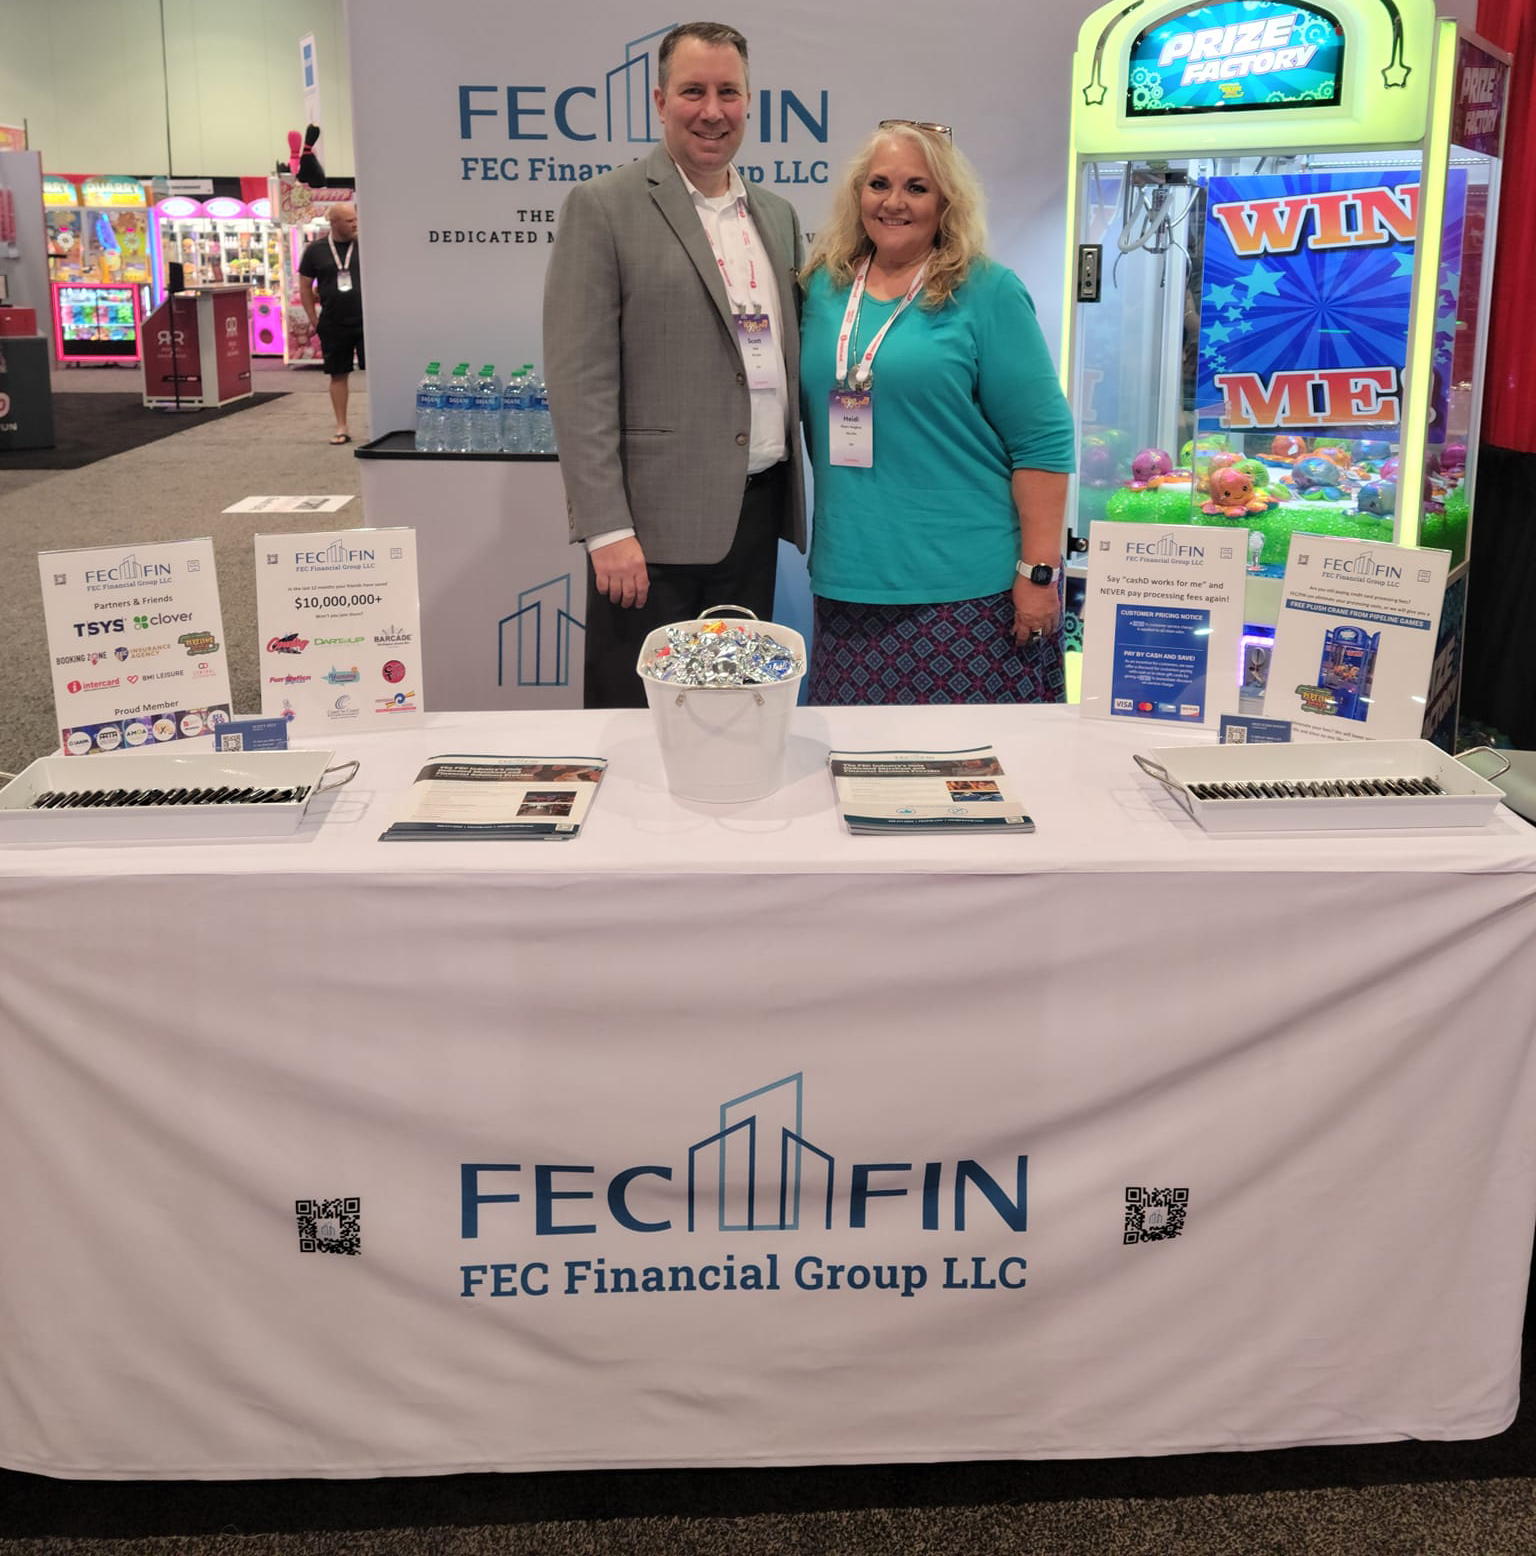 FEC FIN booth at Bowl Expo